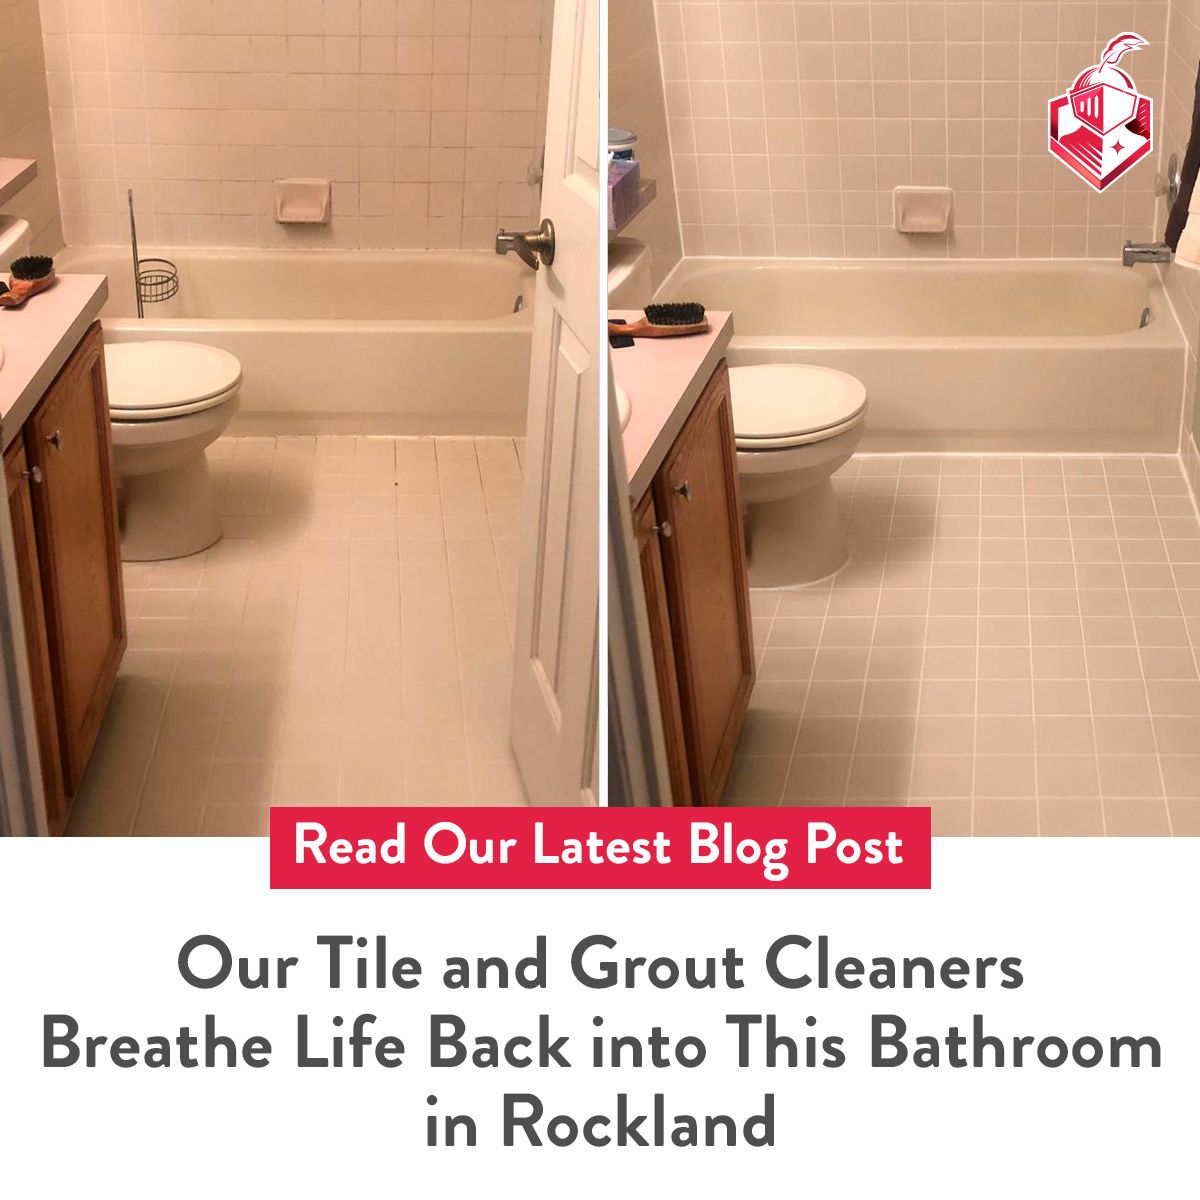 Our Tile and Grout Cleaners Breathe Life Back into This Bathroom in Rockland